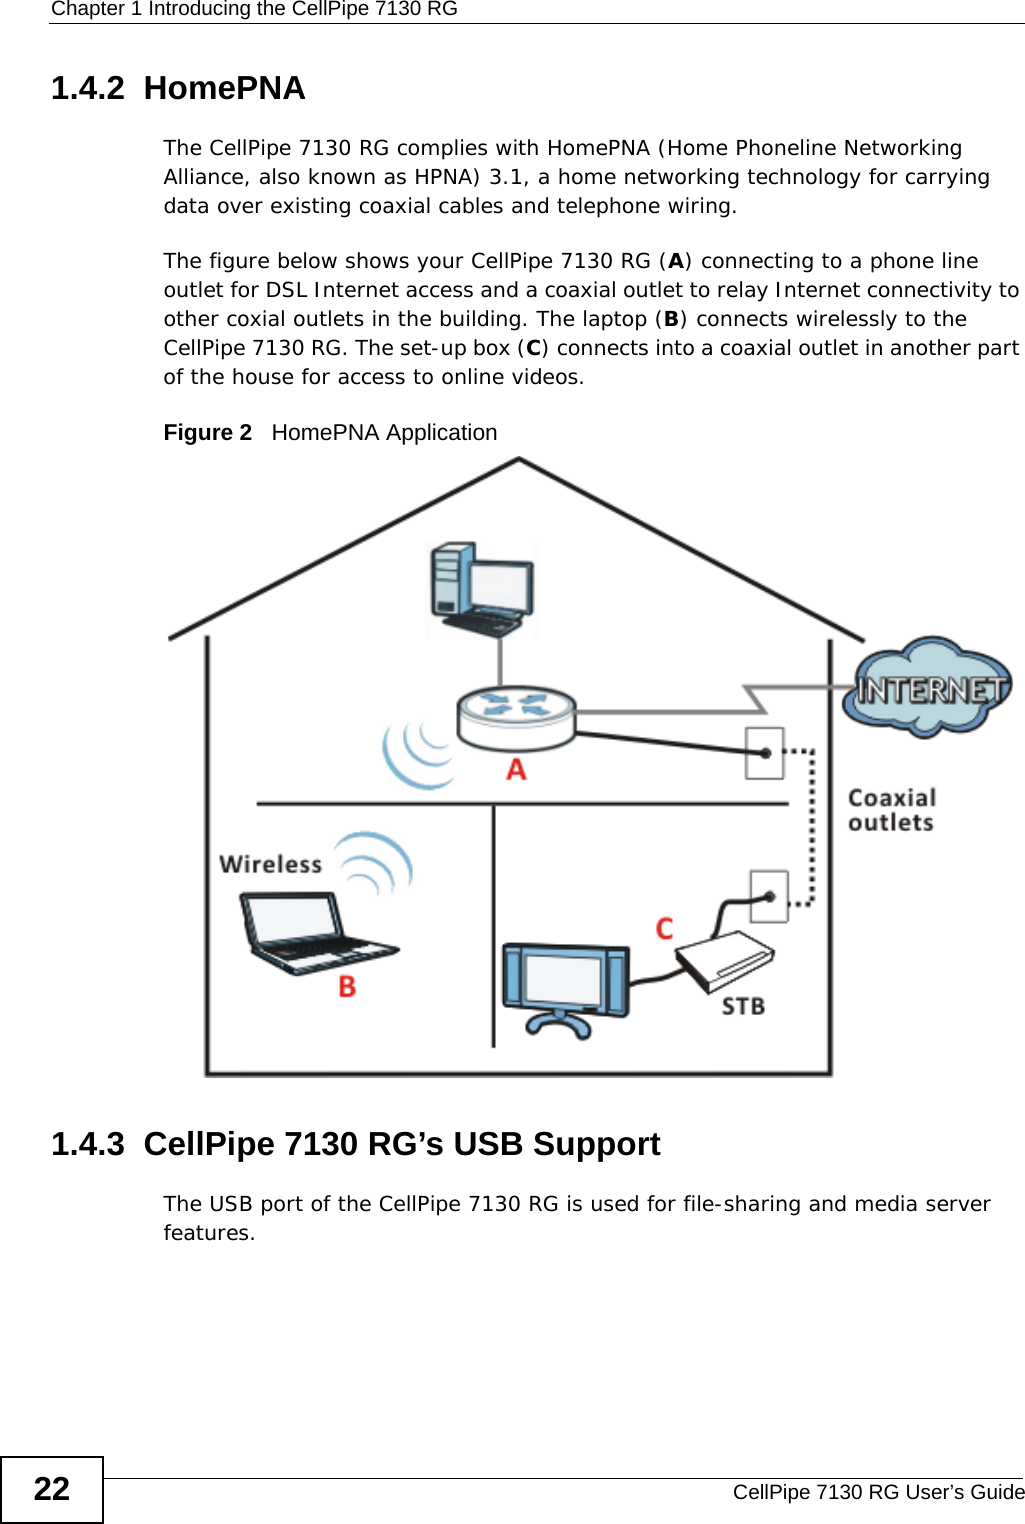 Chapter 1 Introducing the CellPipe 7130 RGCellPipe 7130 RG User’s Guide221.4.2  HomePNAThe CellPipe 7130 RG complies with HomePNA (Home Phoneline Networking Alliance, also known as HPNA) 3.1, a home networking technology for carrying data over existing coaxial cables and telephone wiring.The figure below shows your CellPipe 7130 RG (A) connecting to a phone line outlet for DSL Internet access and a coaxial outlet to relay Internet connectivity to other coxial outlets in the building. The laptop (B) connects wirelessly to the CellPipe 7130 RG. The set-up box (C) connects into a coaxial outlet in another part of the house for access to online videos.Figure 2   HomePNA Application 1.4.3  CellPipe 7130 RG’s USB SupportThe USB port of the CellPipe 7130 RG is used for file-sharing and media server features.